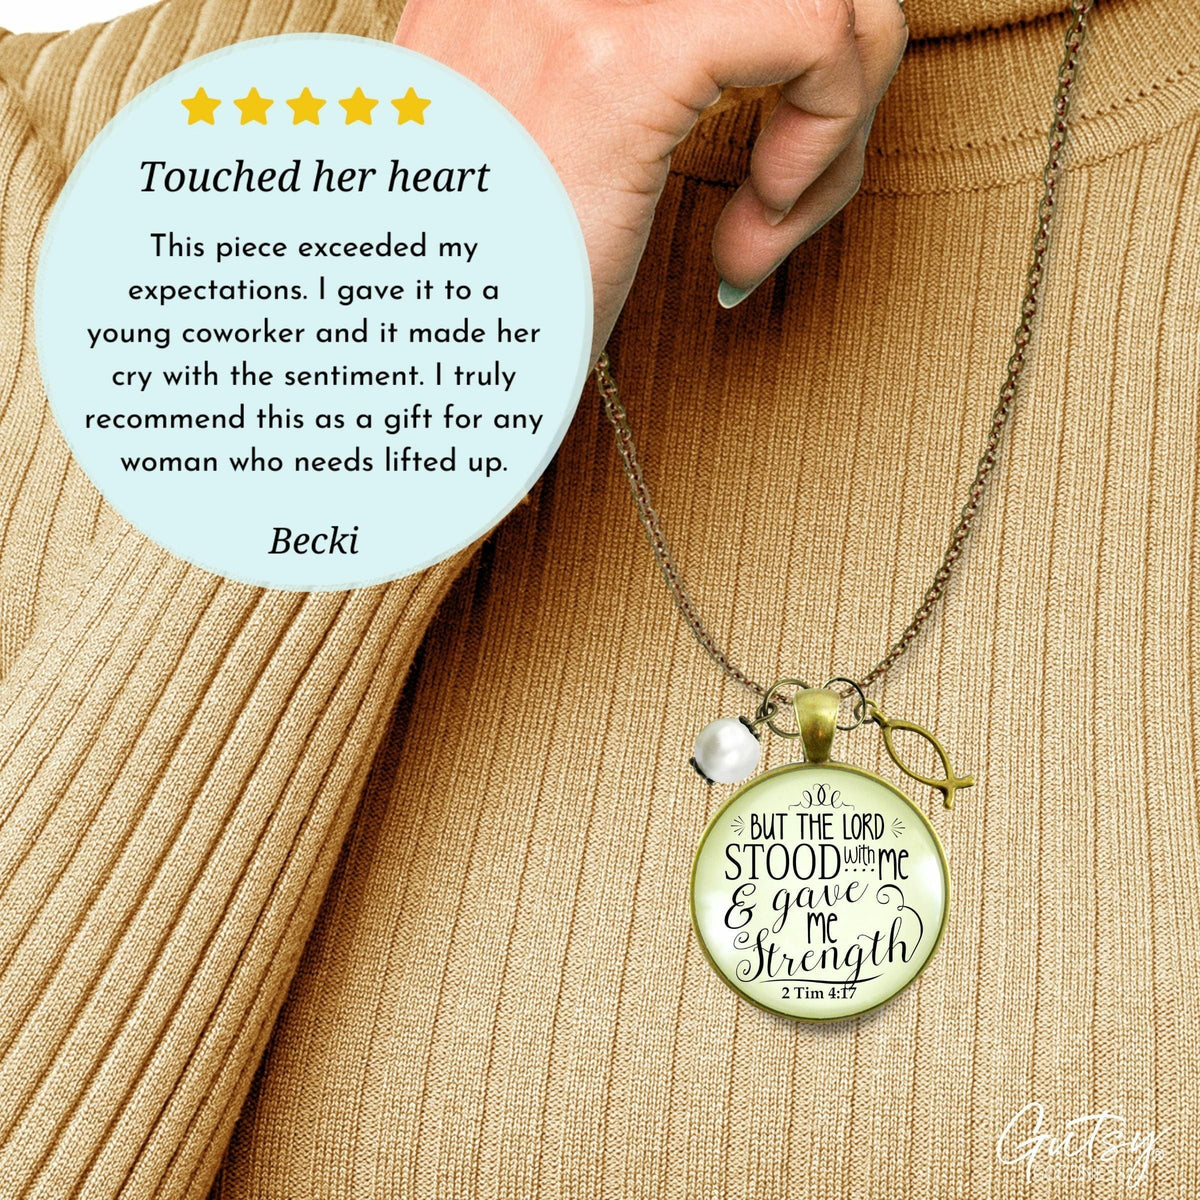 Gutsy Goodness Faith Necklace He Stood By and Gave Strength Encouragement Faith Jewelry - Gutsy Goodness;Faith Necklace He Stood By And Gave Strength Encouragement Faith Jewelry - Gutsy Goodness Handmade Jewelry Gifts